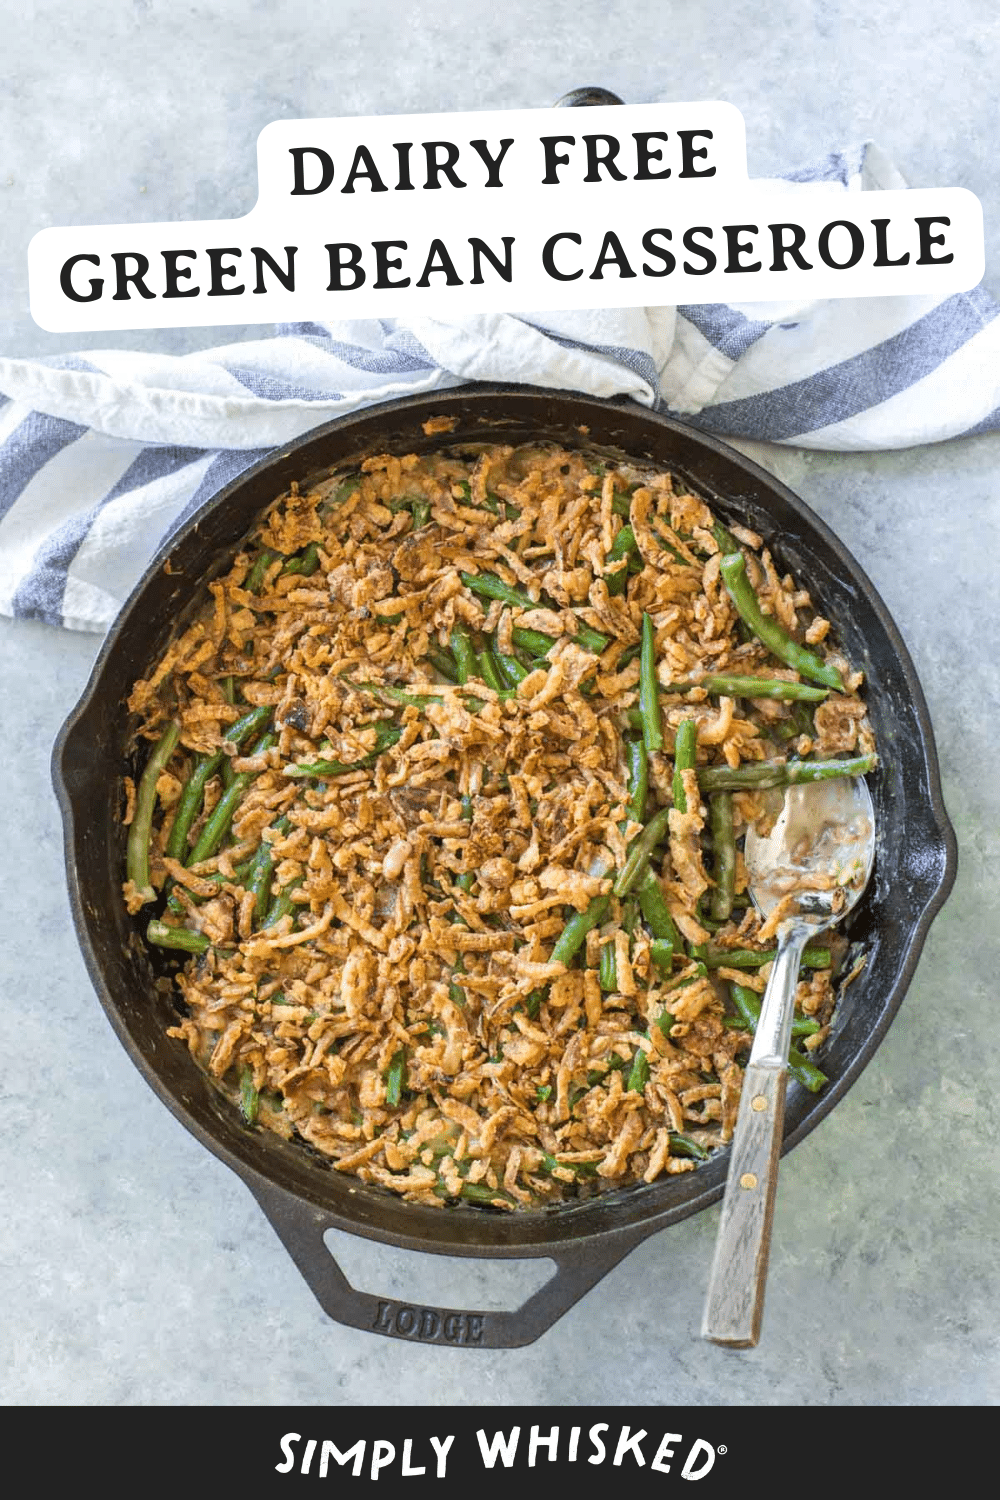 Dairy Free Green Bean Casserole (Vegan Option) - Simply Whisked